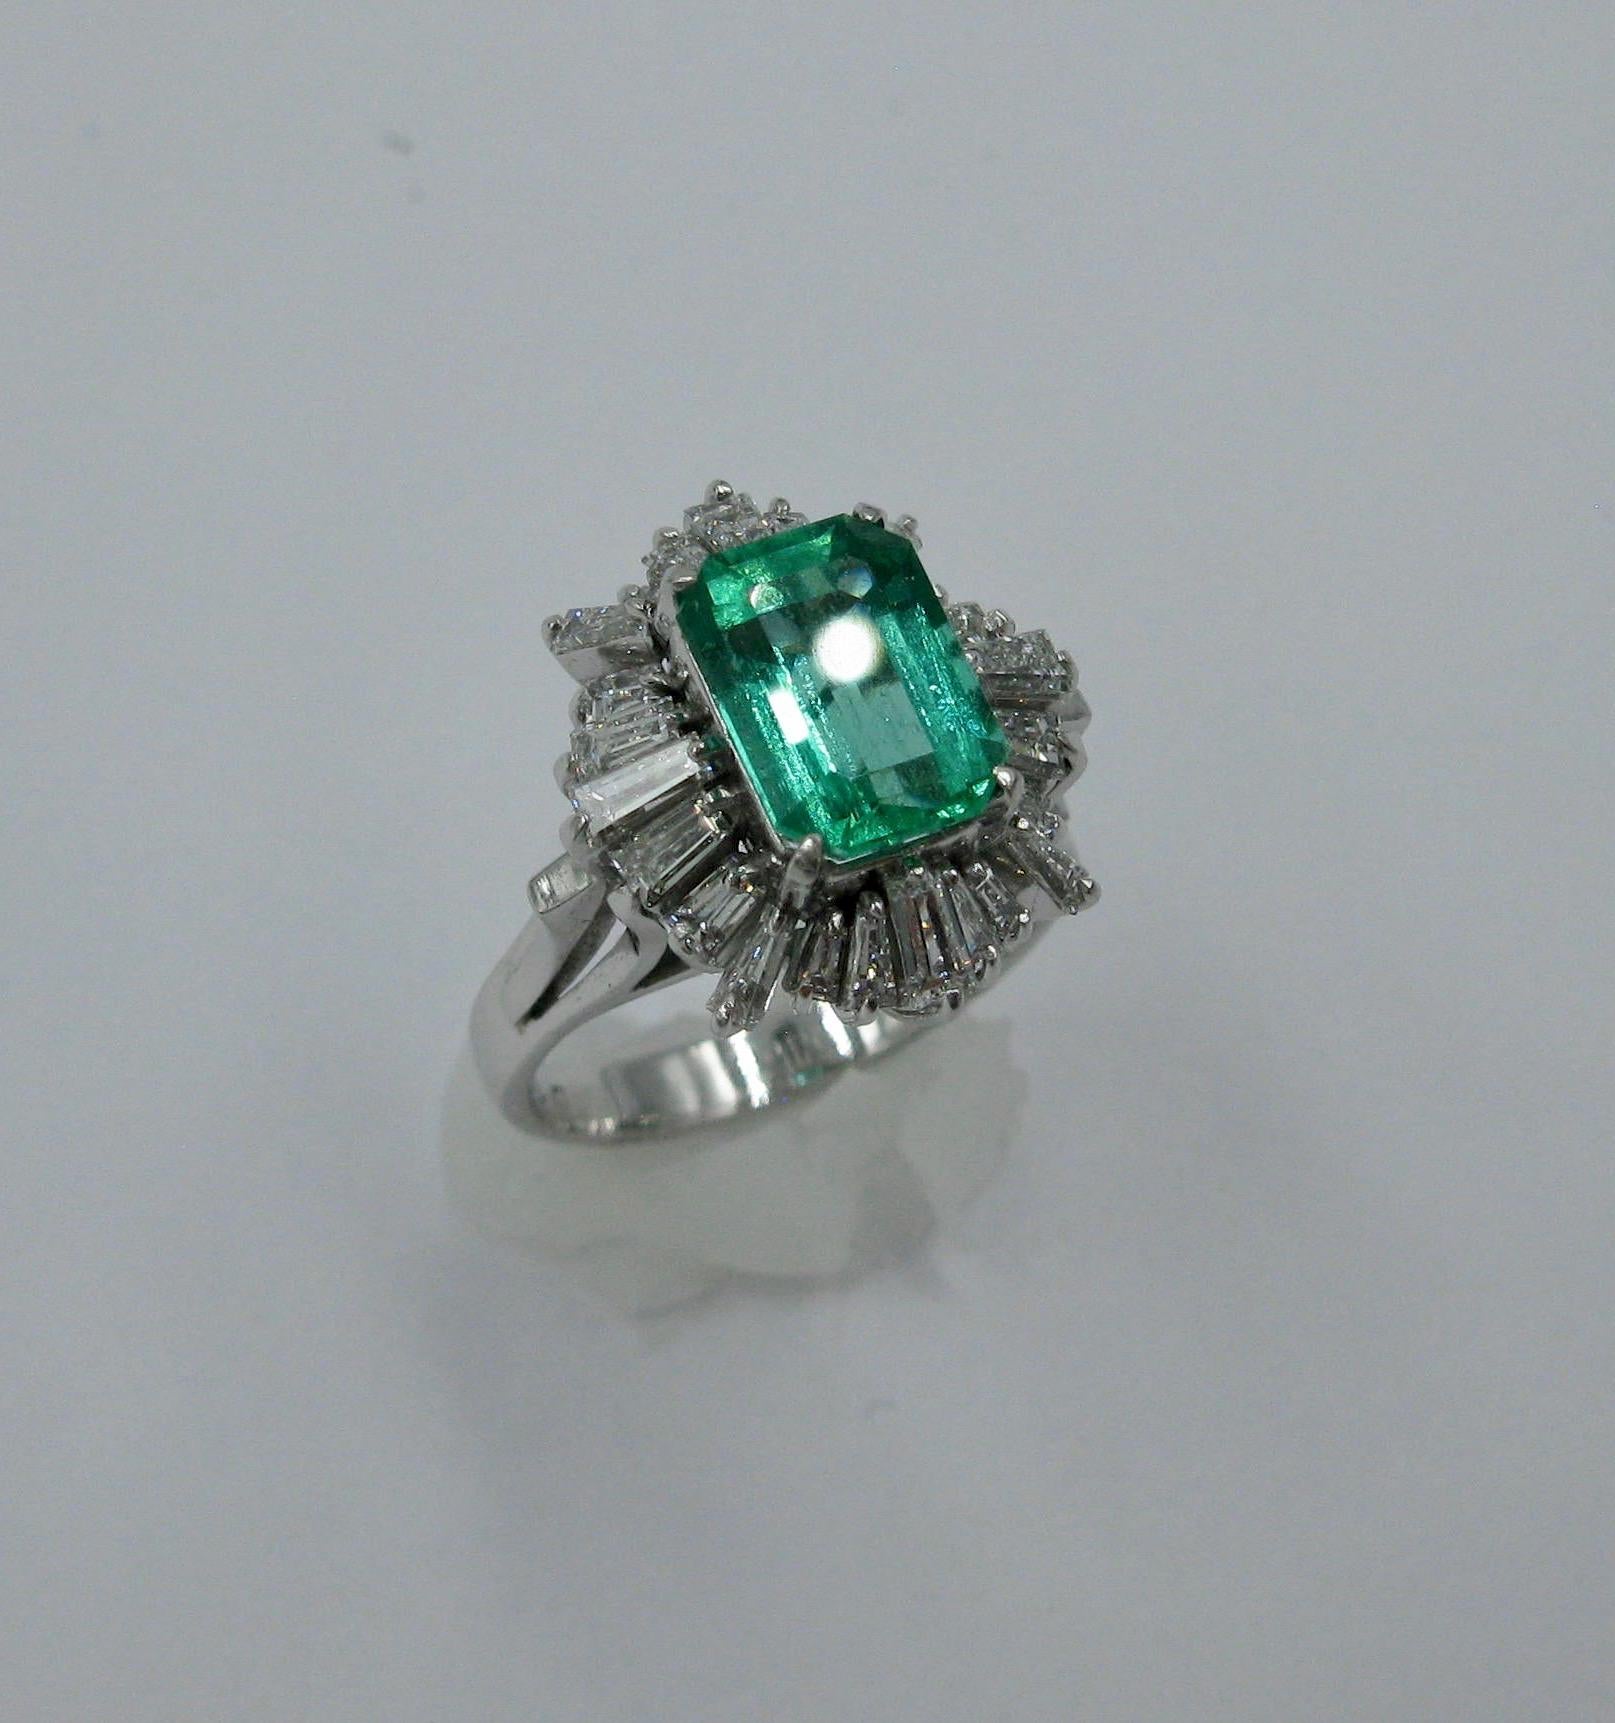 This is a stunning cocktail ring with a 2.1 Carat Emerald Cut Emerald of great beauty surrounded by 24 brilliant white Tapered Baguette Cut Diamonds totaling 1.2 Carat all set in Platinum.  The jewels are of superb quality.  The halo effect of the